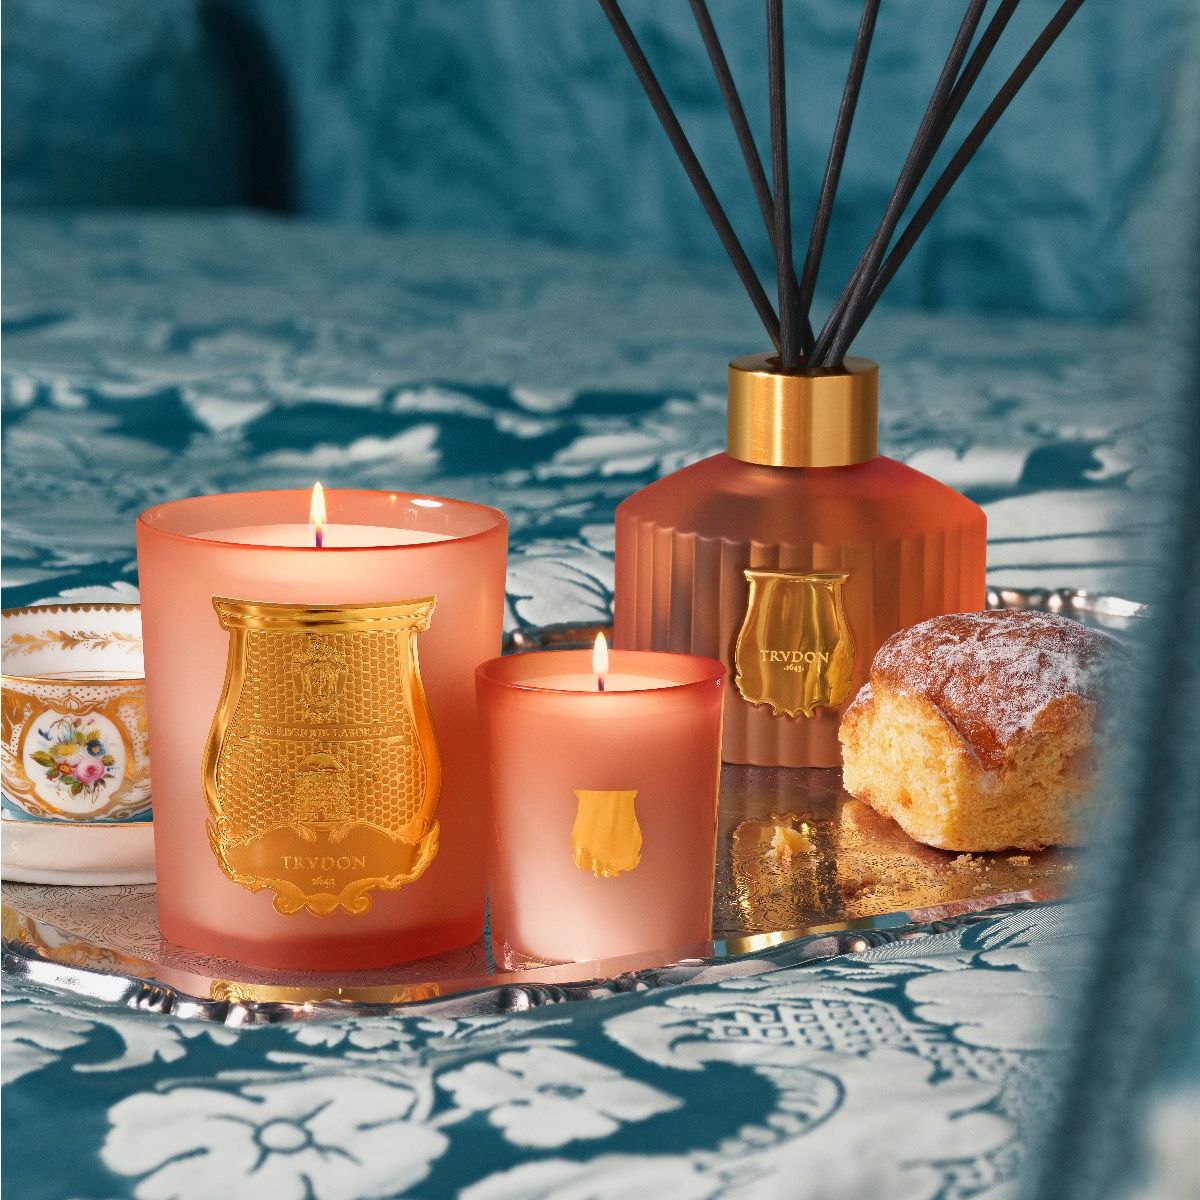 TUILERIES PETITE CANDLE - 70G - TRUDON